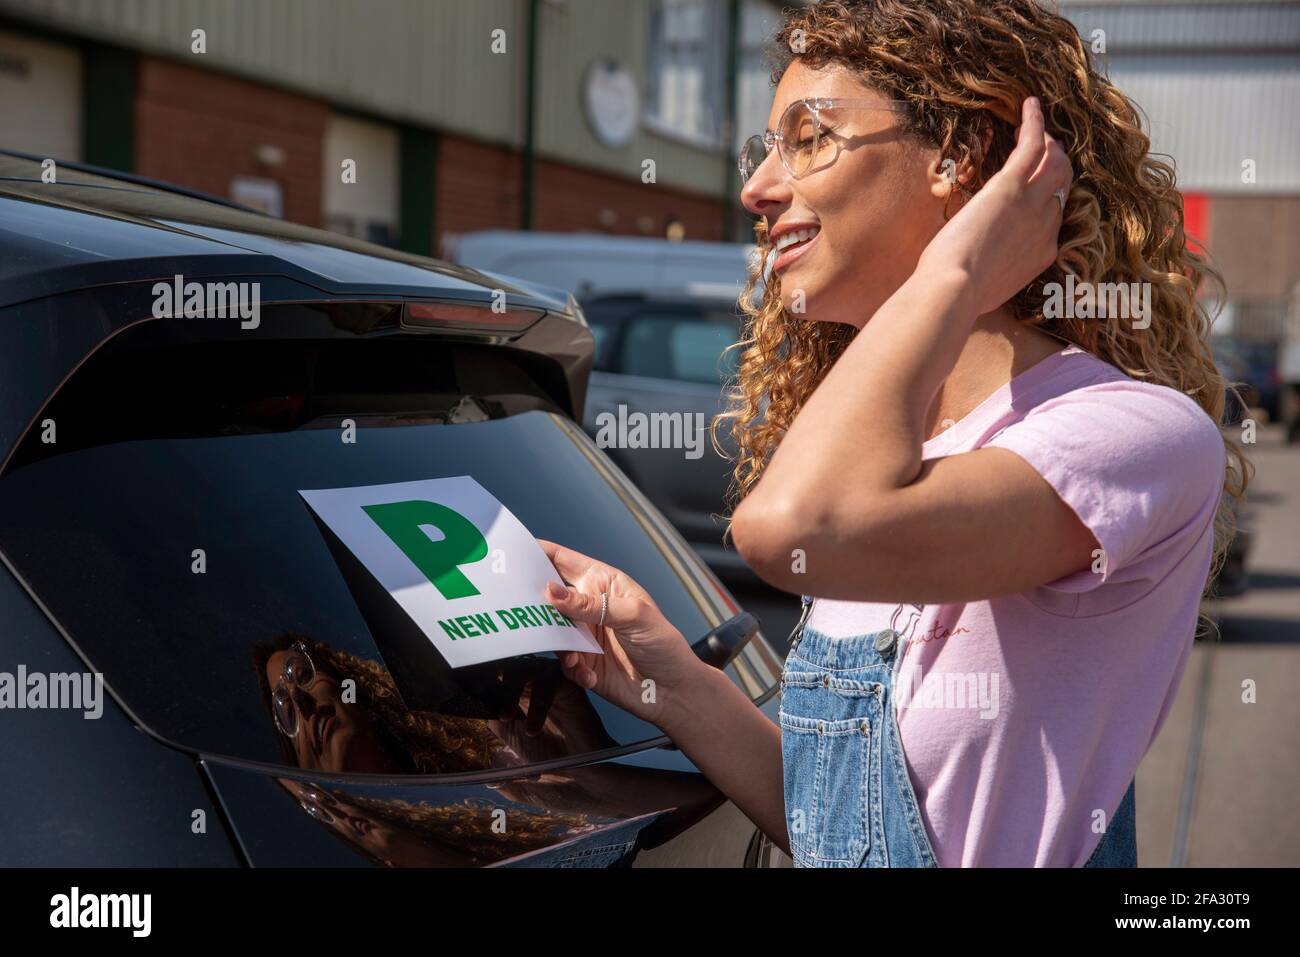 England, UK. 2021.  New driver, young attractive woman holding a green new driver sign to display on her car after passing the driving test. Stock Photo